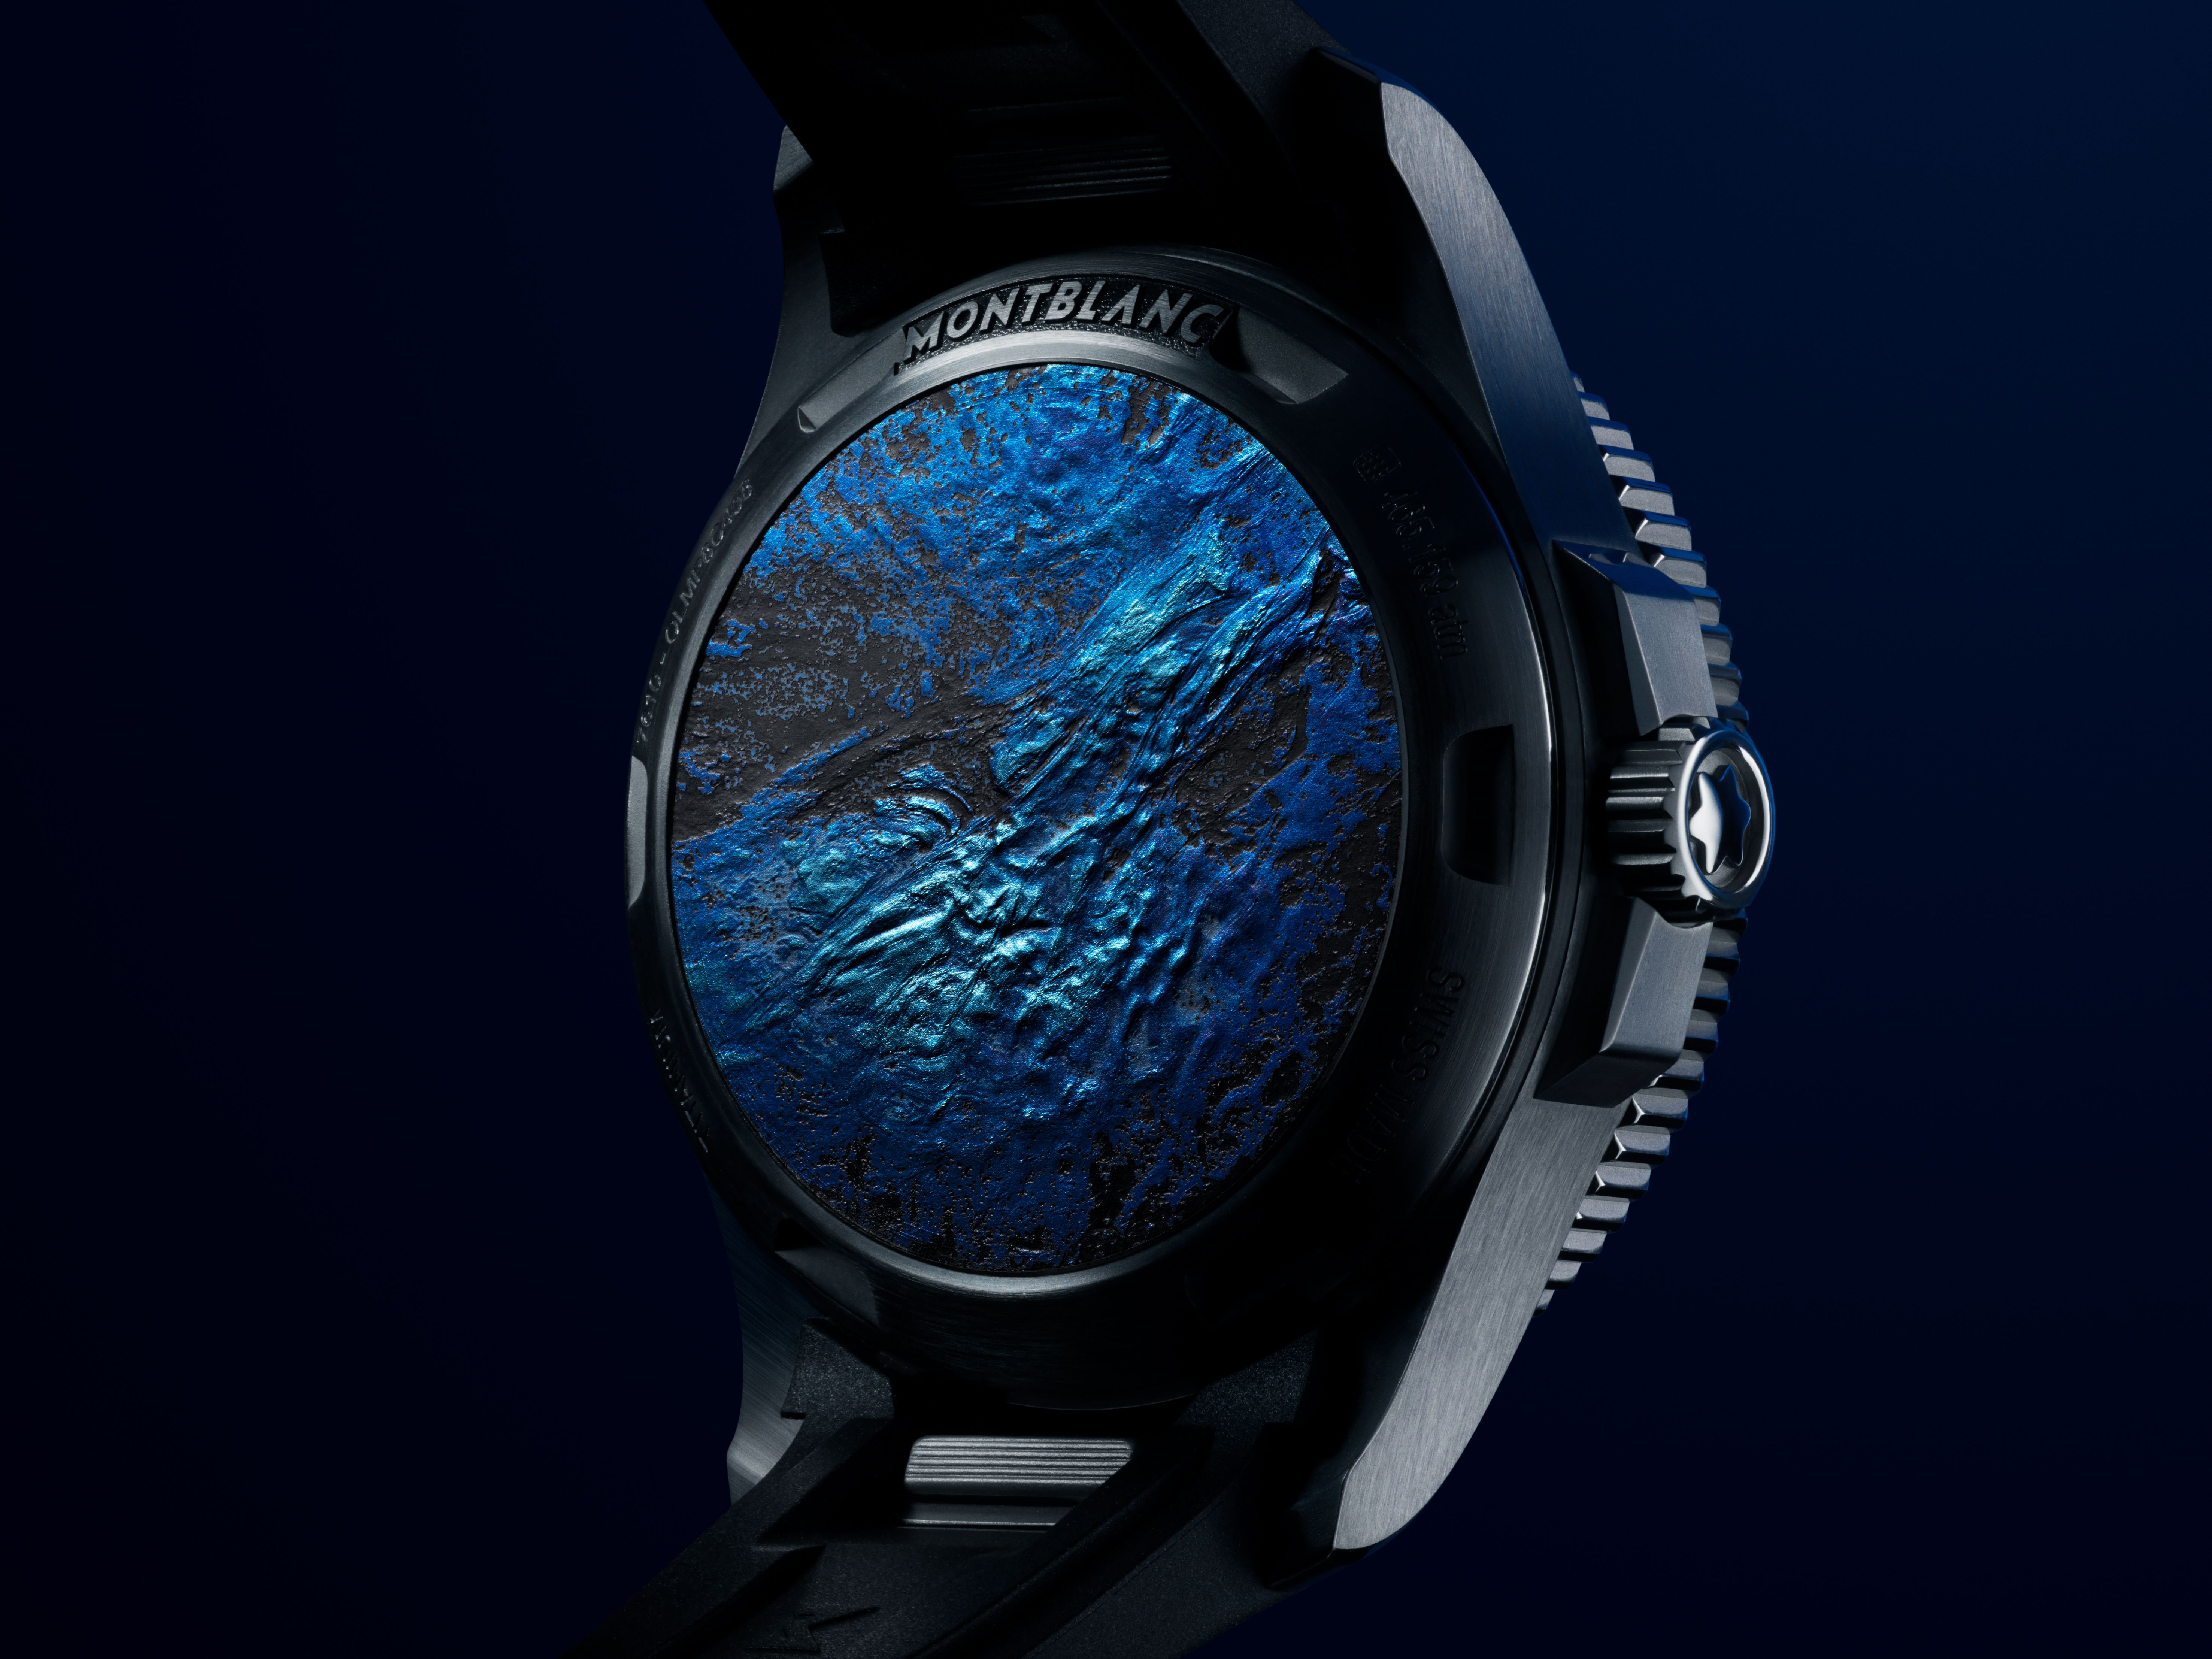 The engraved caseback on the Montblanc Iced Sea 0 Oxygen Deep 4810